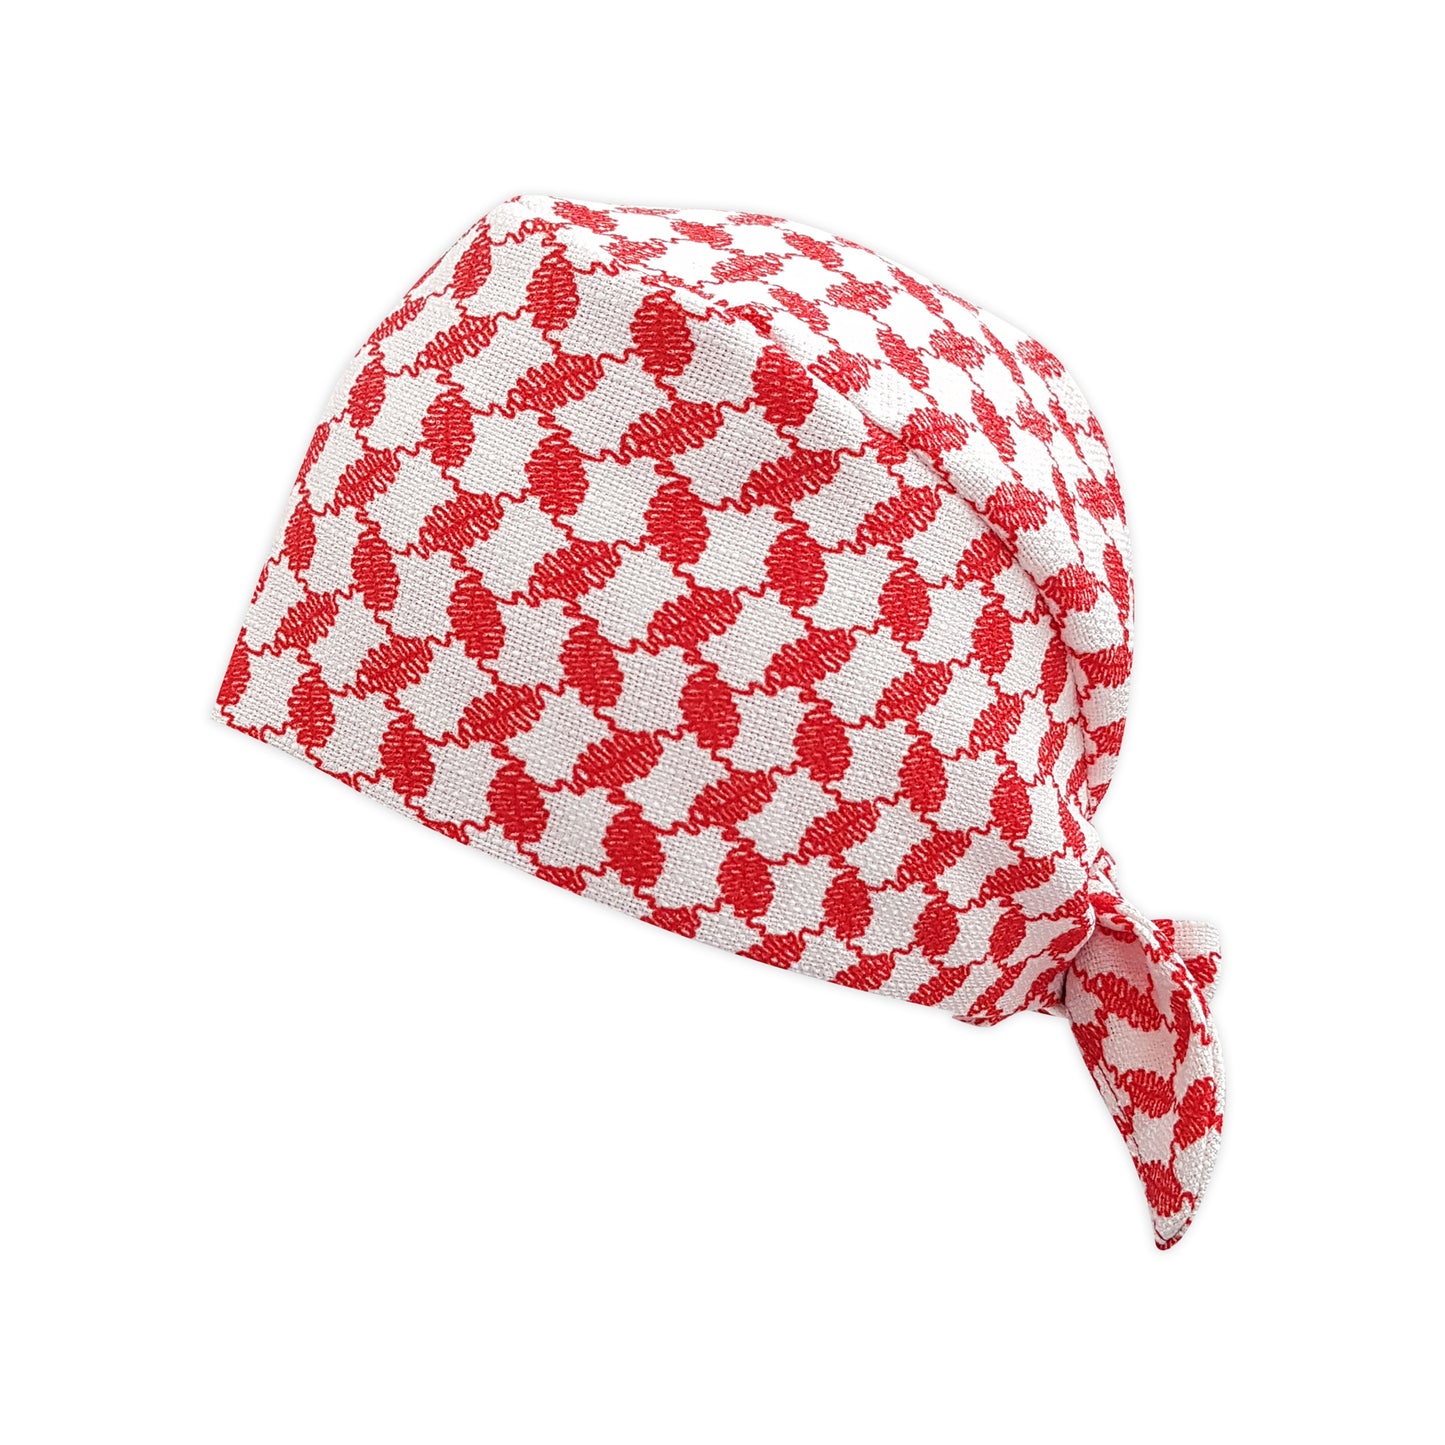 Arabian Red Ghutra Surgical Hat